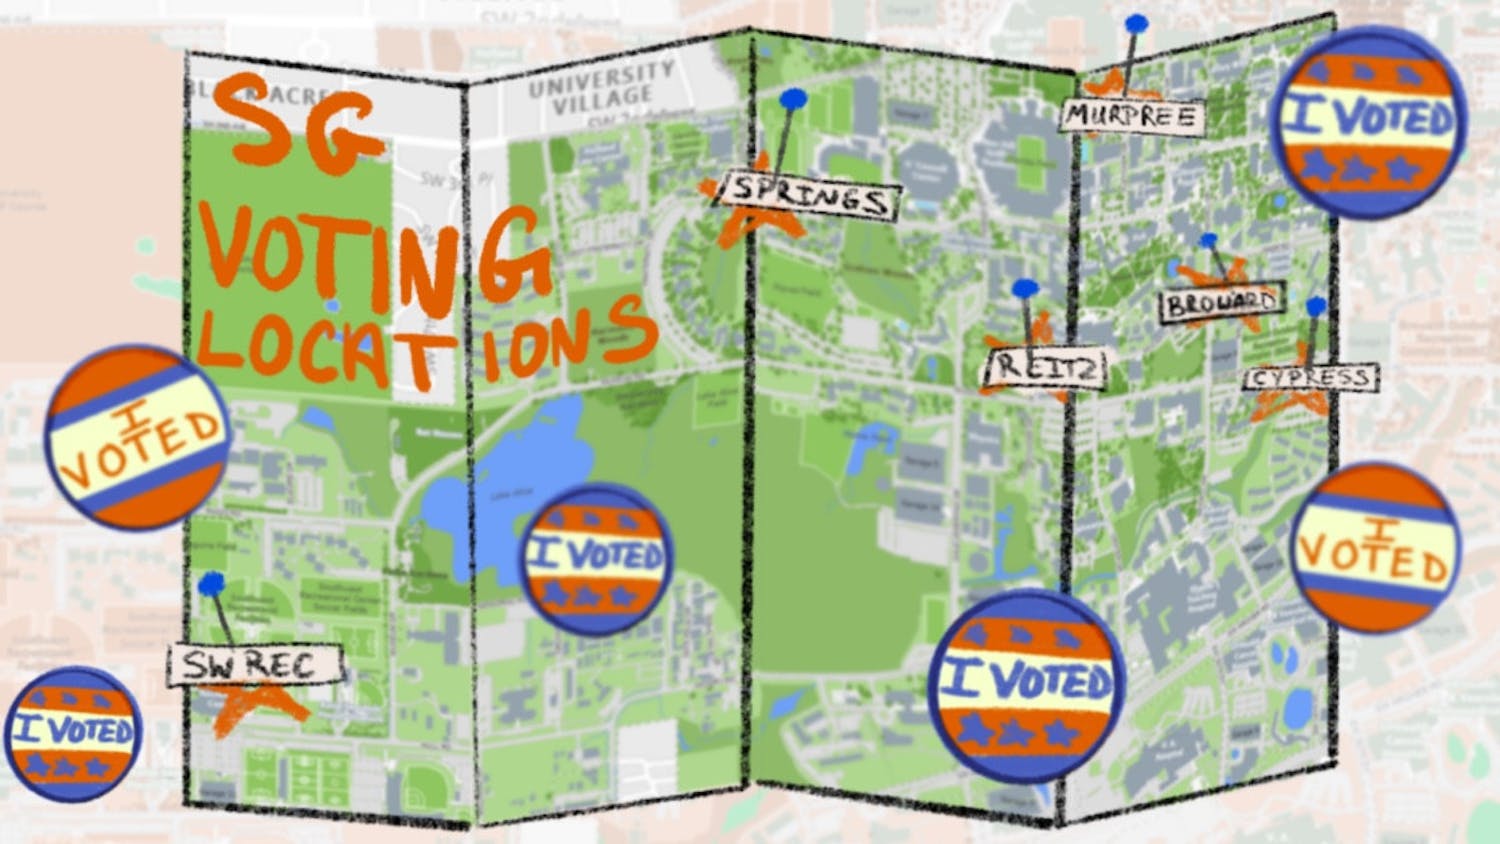 Spring 2022 Student Government polling locations.